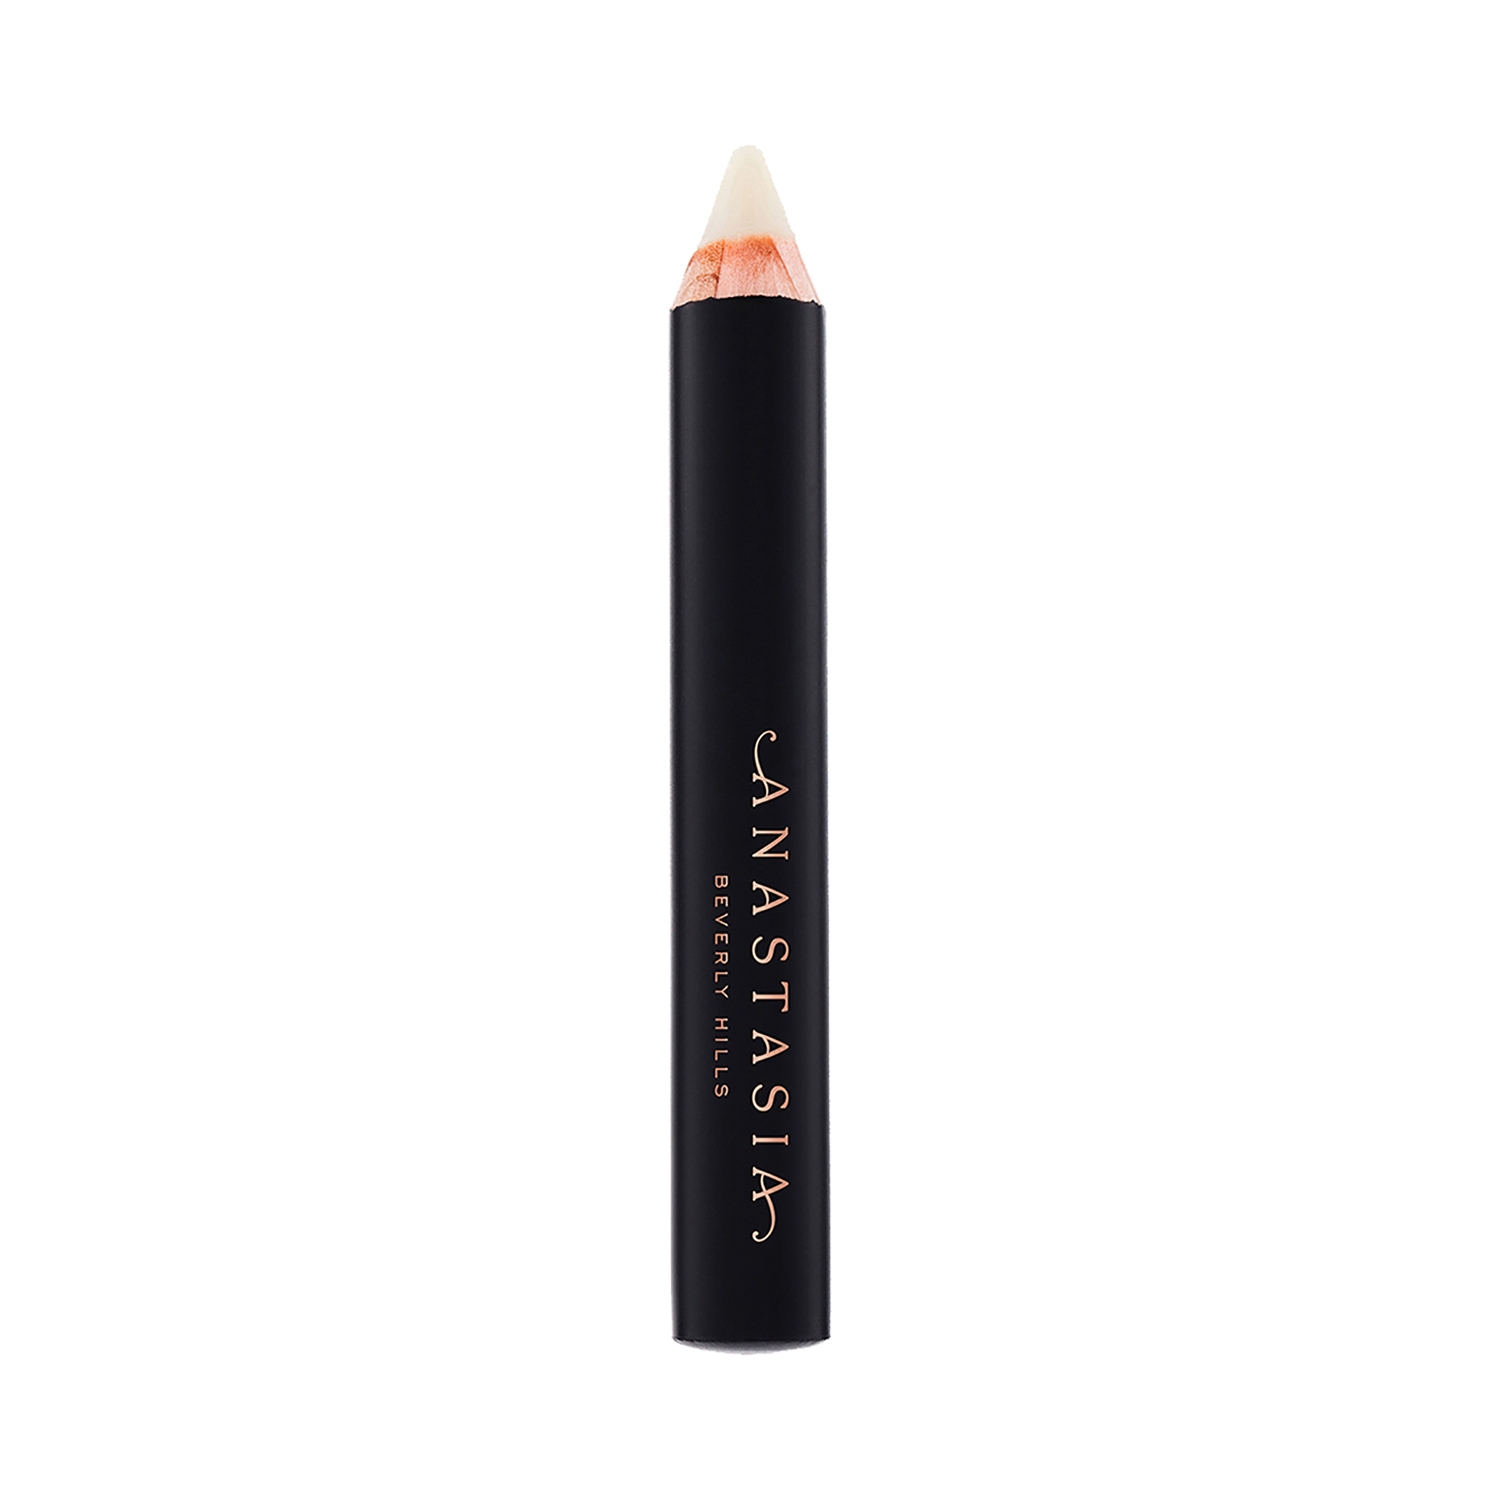 Anastasia Beverly Hills | Anastasia Beverly Hills Brow Primer - Clear (2.55g)